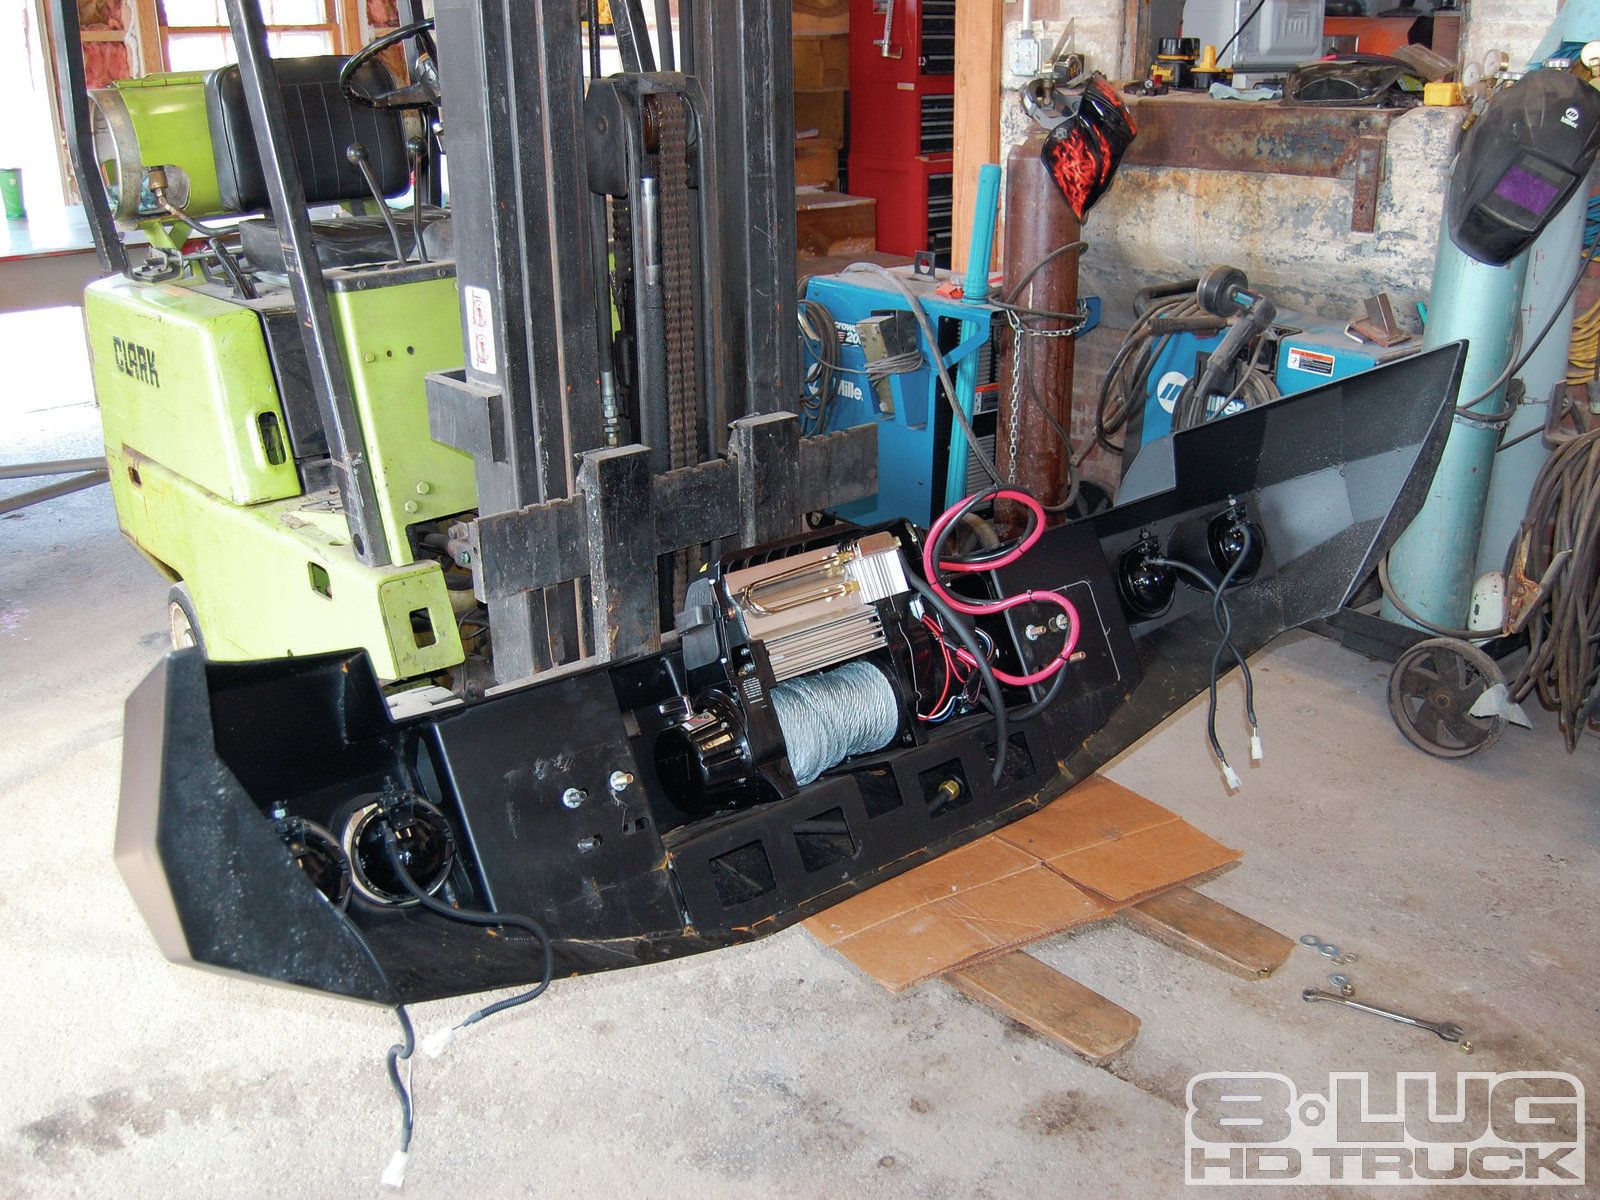 1210-8l-35+winch-time-ultimate-tow-and-work-truck-upgrades+fabricate-new-mounts.jpg